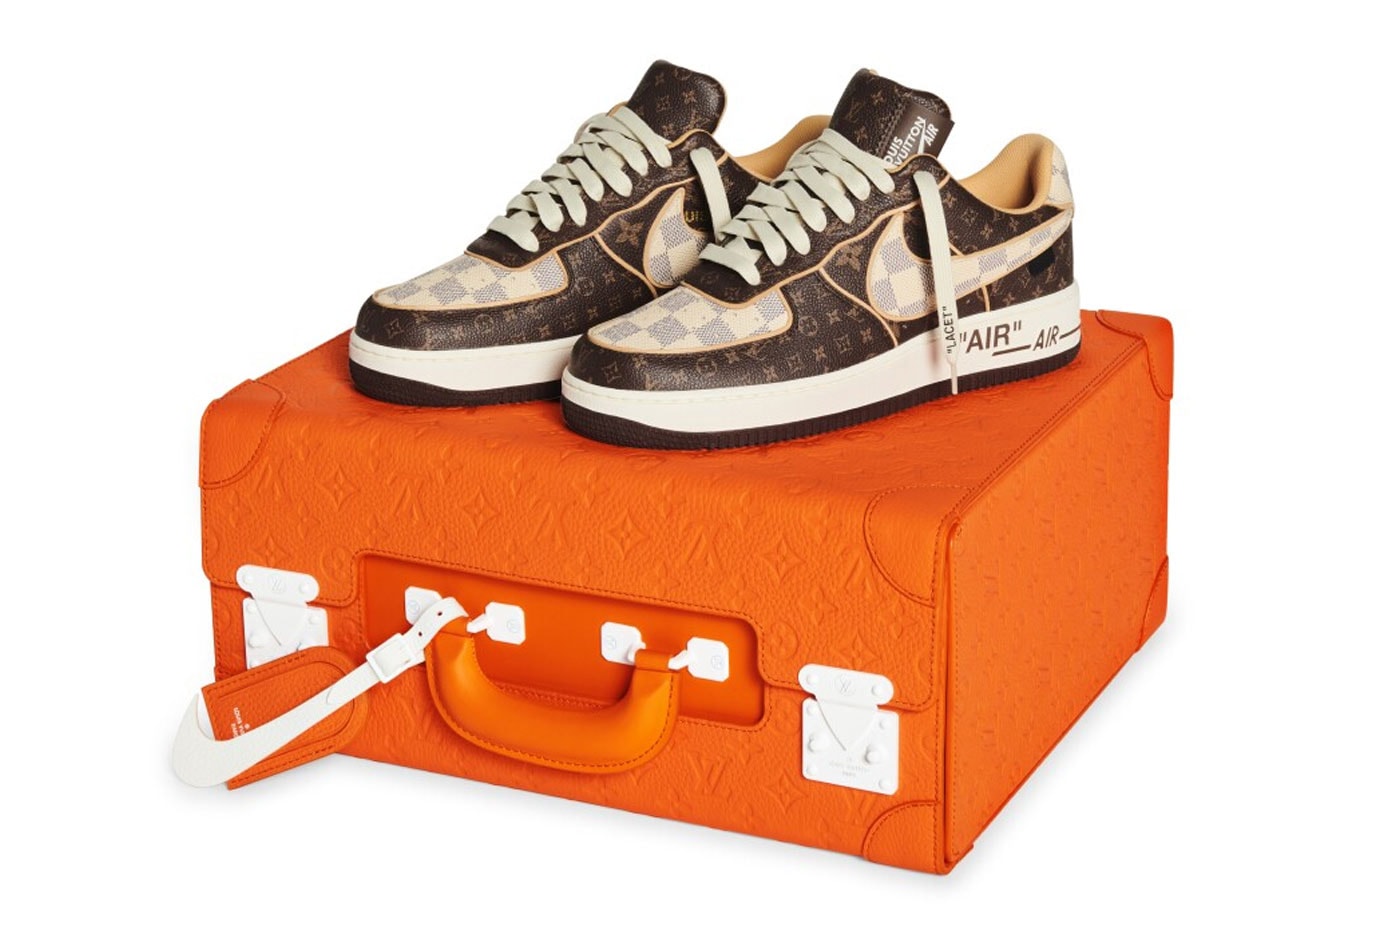 The Louis Vuitton x Nike Air Force 1 by Virgil Abloh Sneaker Is Currently Going for $90,000 USD sneakers sotheby's auctions lv monogram air bespoke